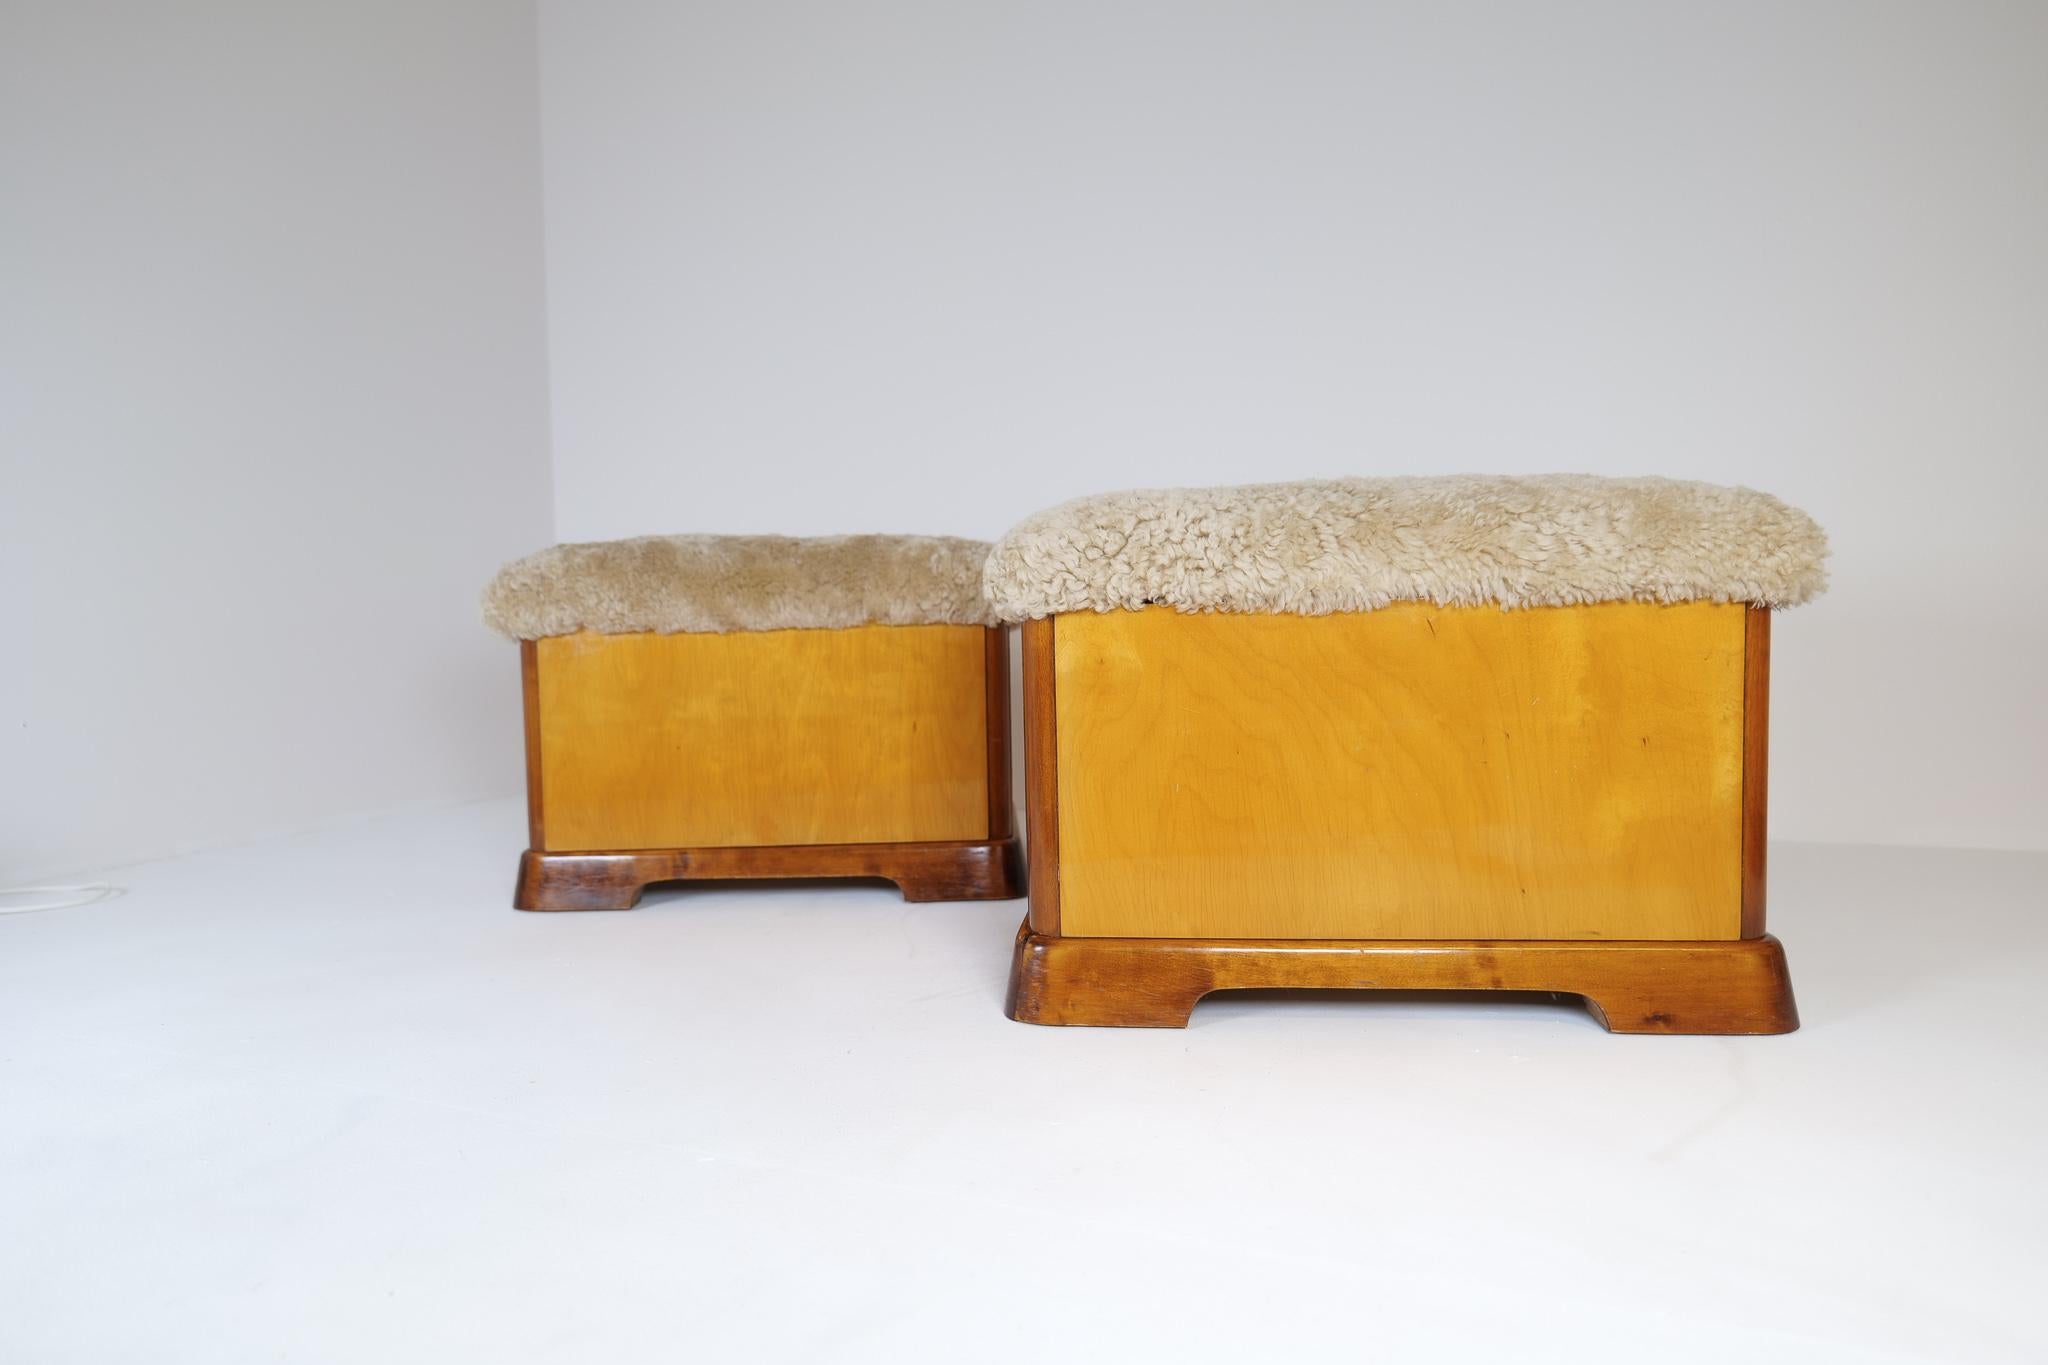 Mid-20th Century Swedish Art Deco Stools in Lacquered Birch and Sheepskin/Shearling Seat 1940s For Sale